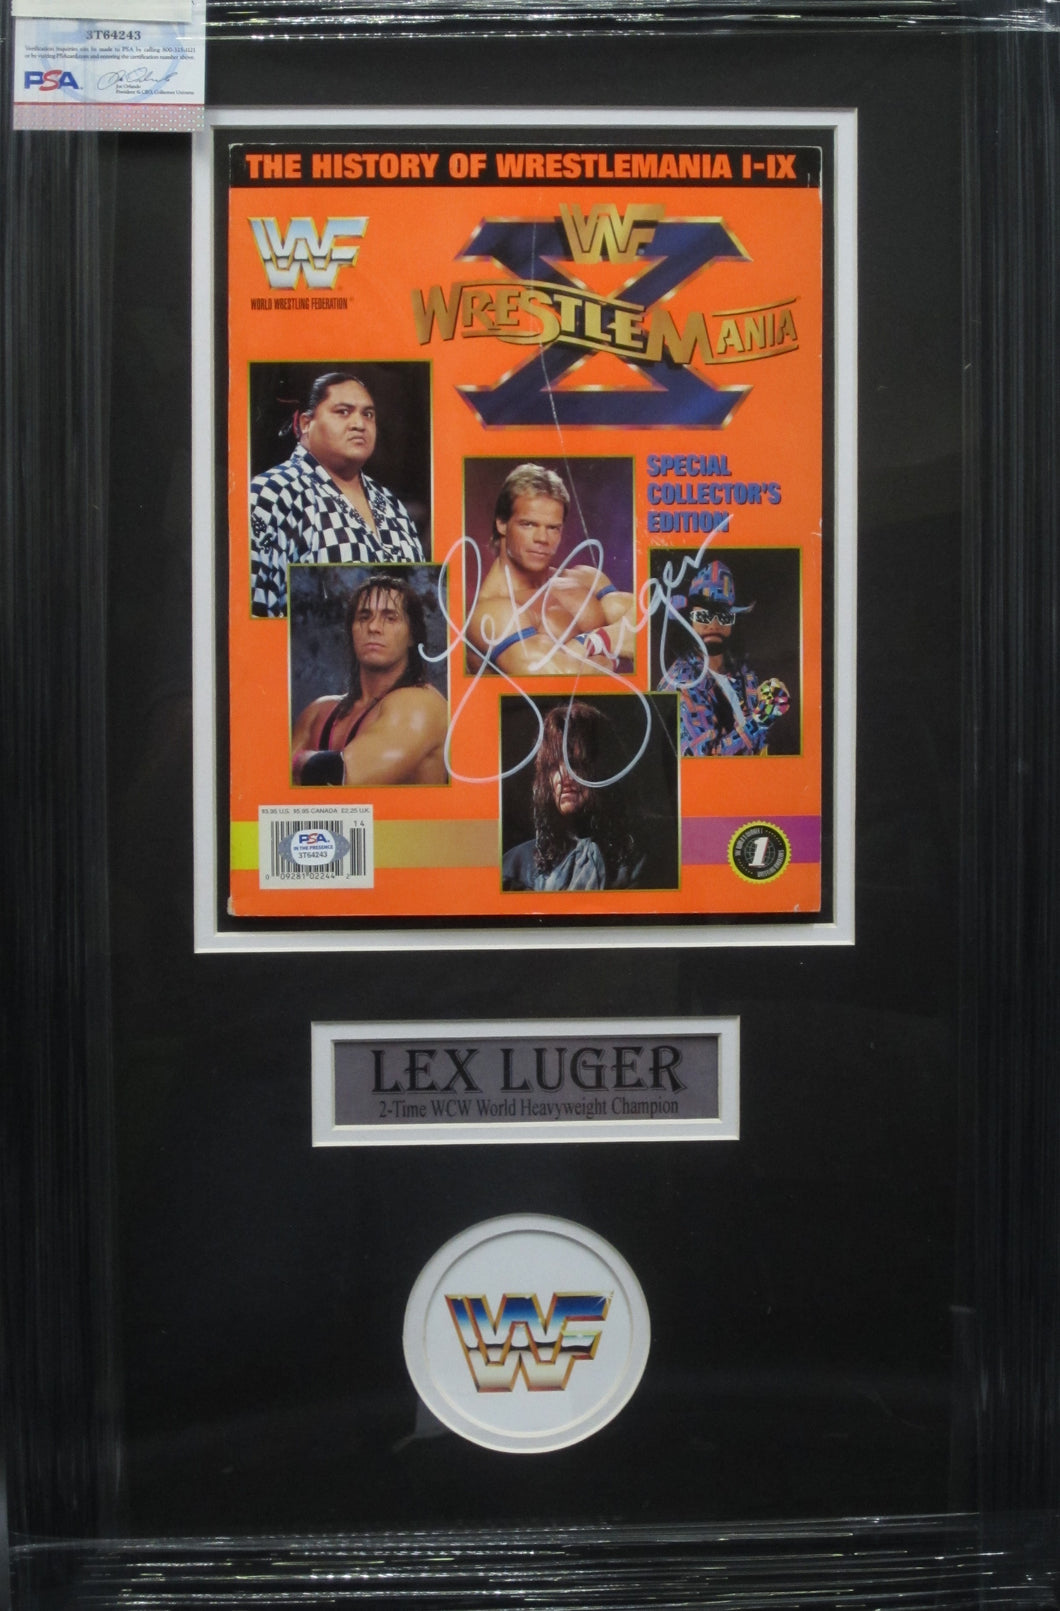 American Professional Wrestler Lex Luger Signed WWF WrestleMania Magazine Framed & Matted with PSA COA